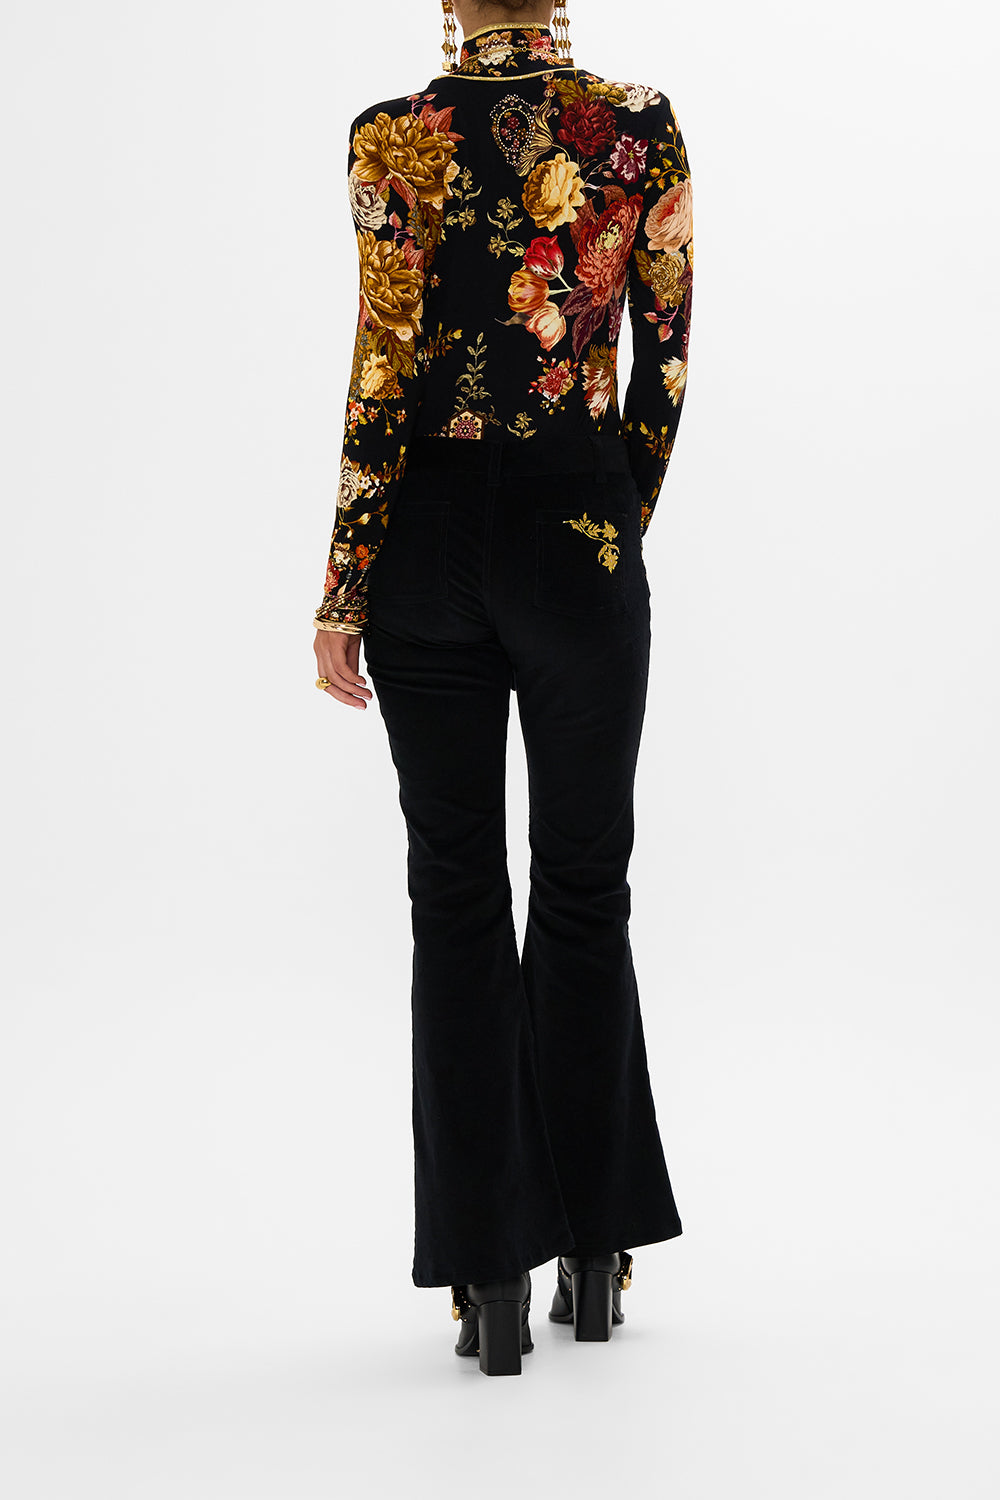 CAMILLA floral jersey turtleneck in Stitched In Time print.